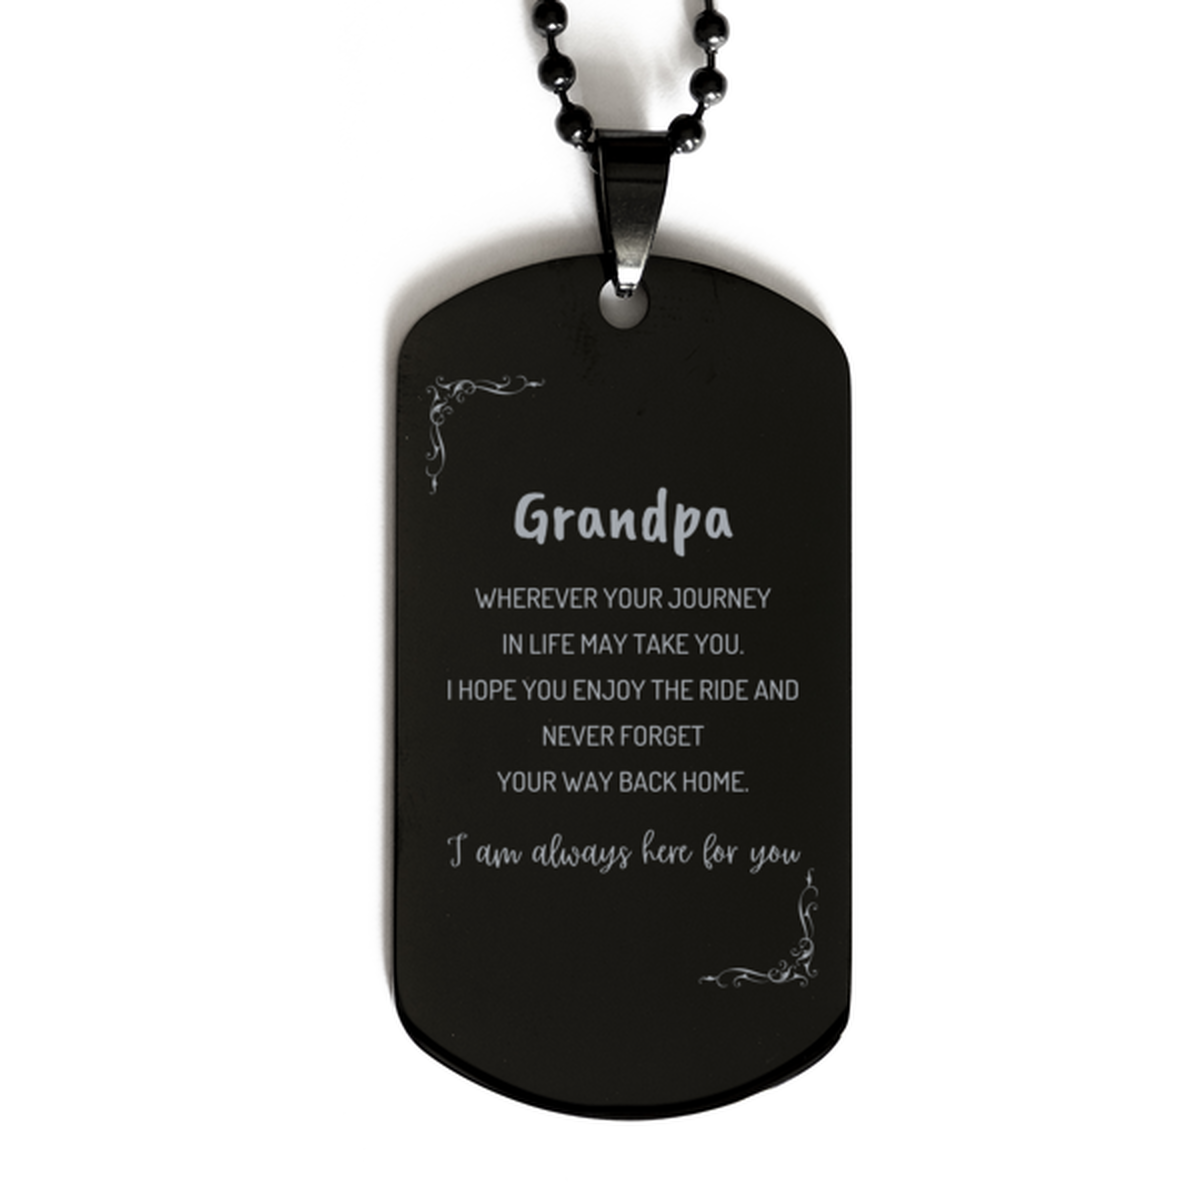 Grandpa wherever your journey in life may take you, I am always here for you Grandpa Black Dog Tag, Awesome Christmas Gifts For Grandpa, Grandpa Birthday Gifts for Men Women Family Loved One